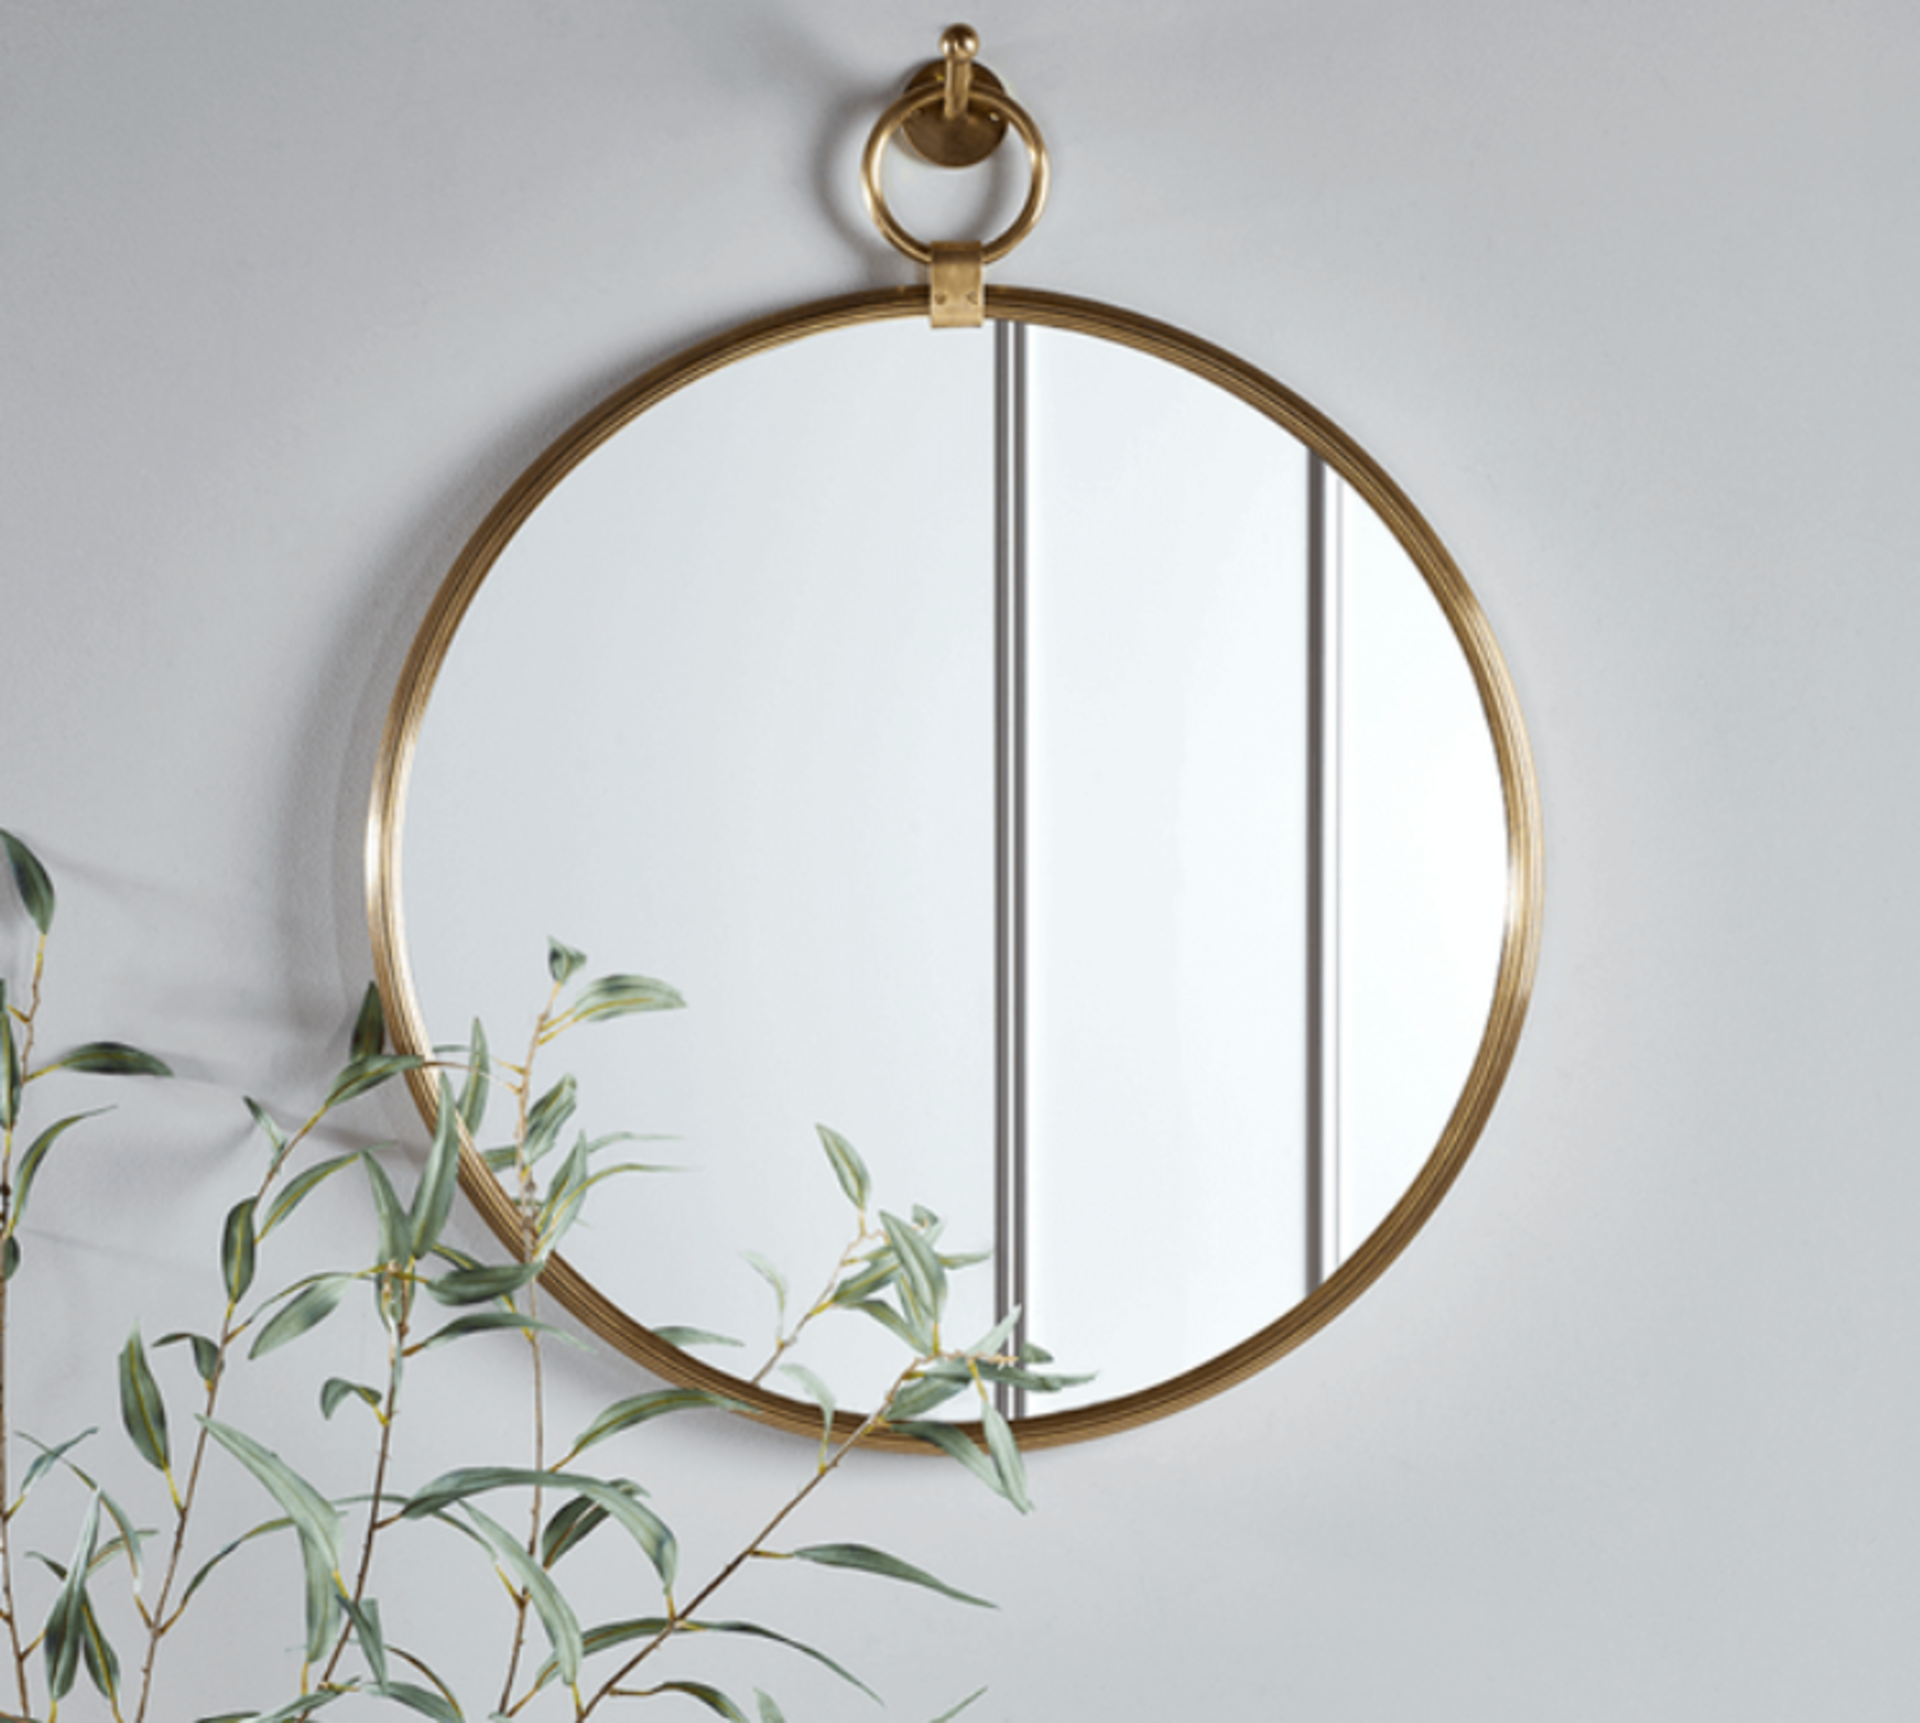 Cox & Cox Aura Brass Mirror. RRP £250.00. Crafted in a simple, circular shape with a wide mirrored